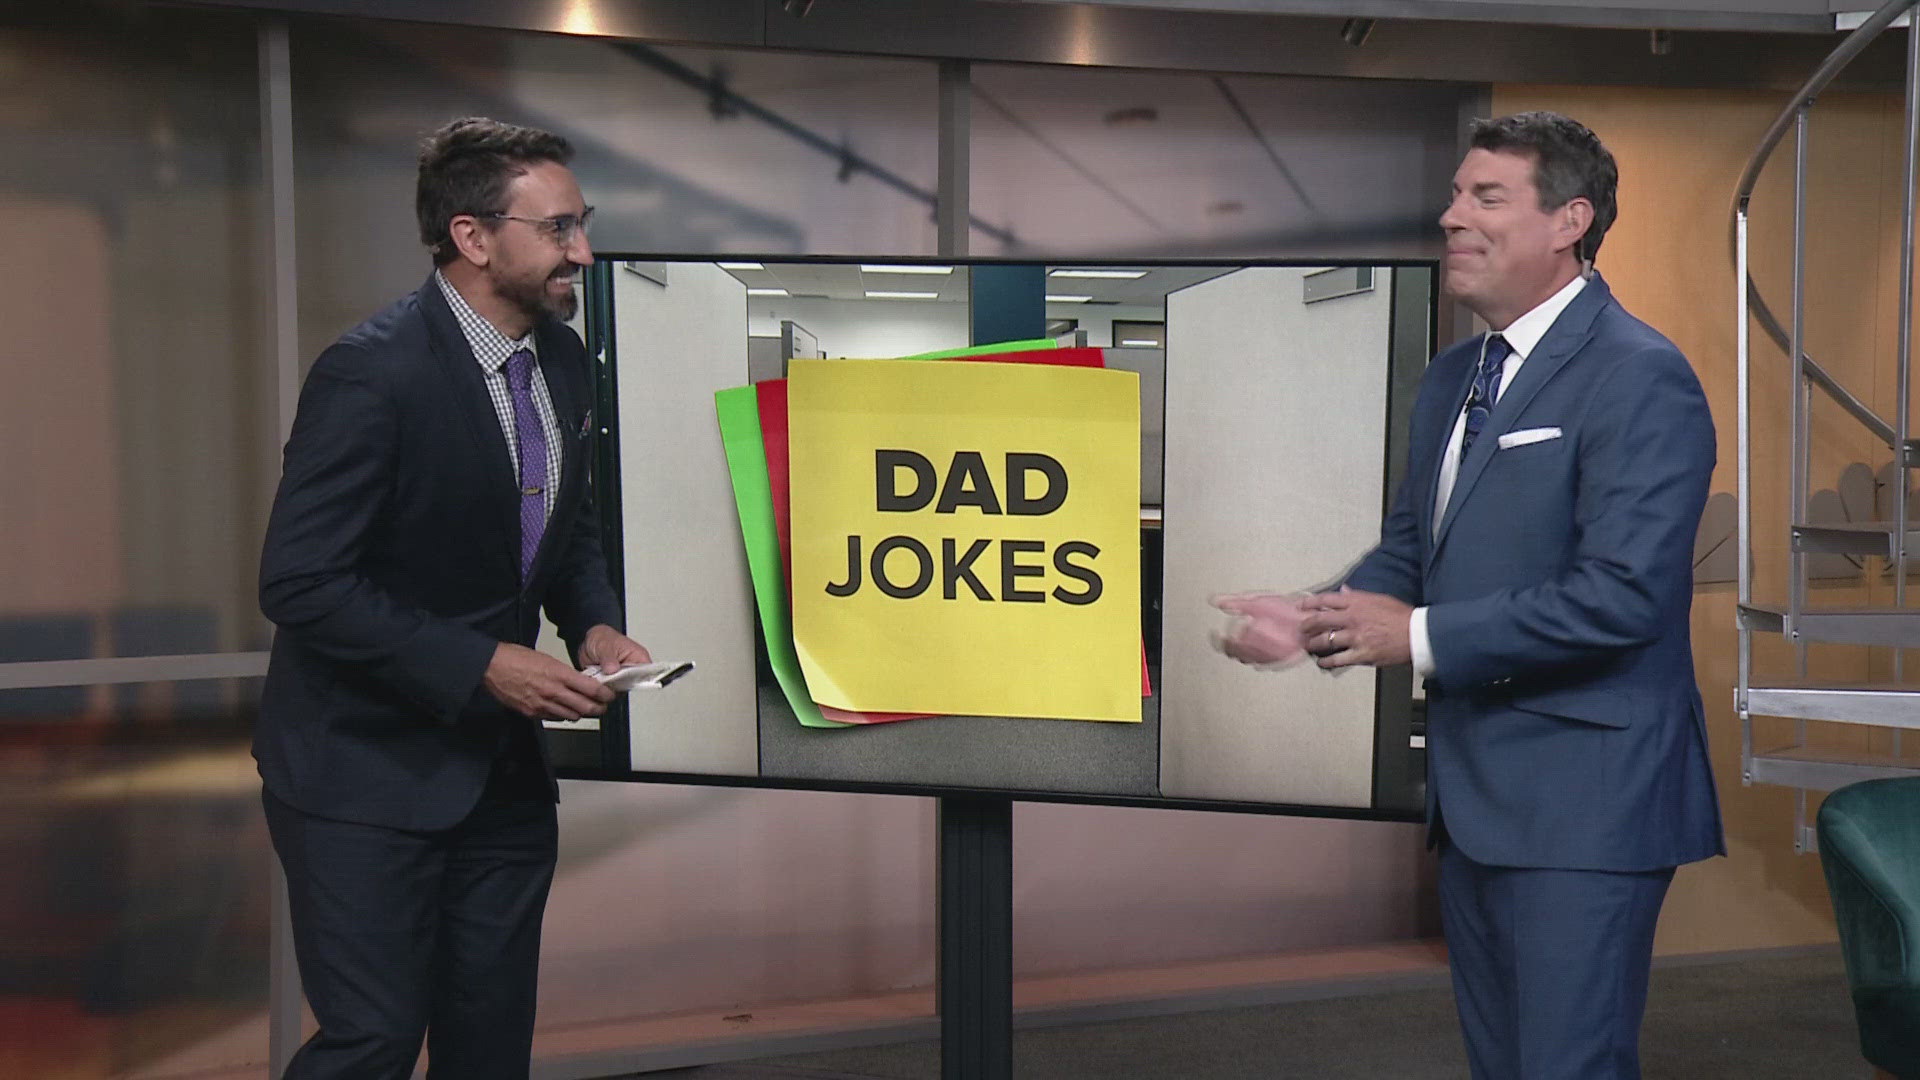 We're starting the work week with some laughs! It's time for dad jokes with Matt Wintz and Dave Chudowsky.